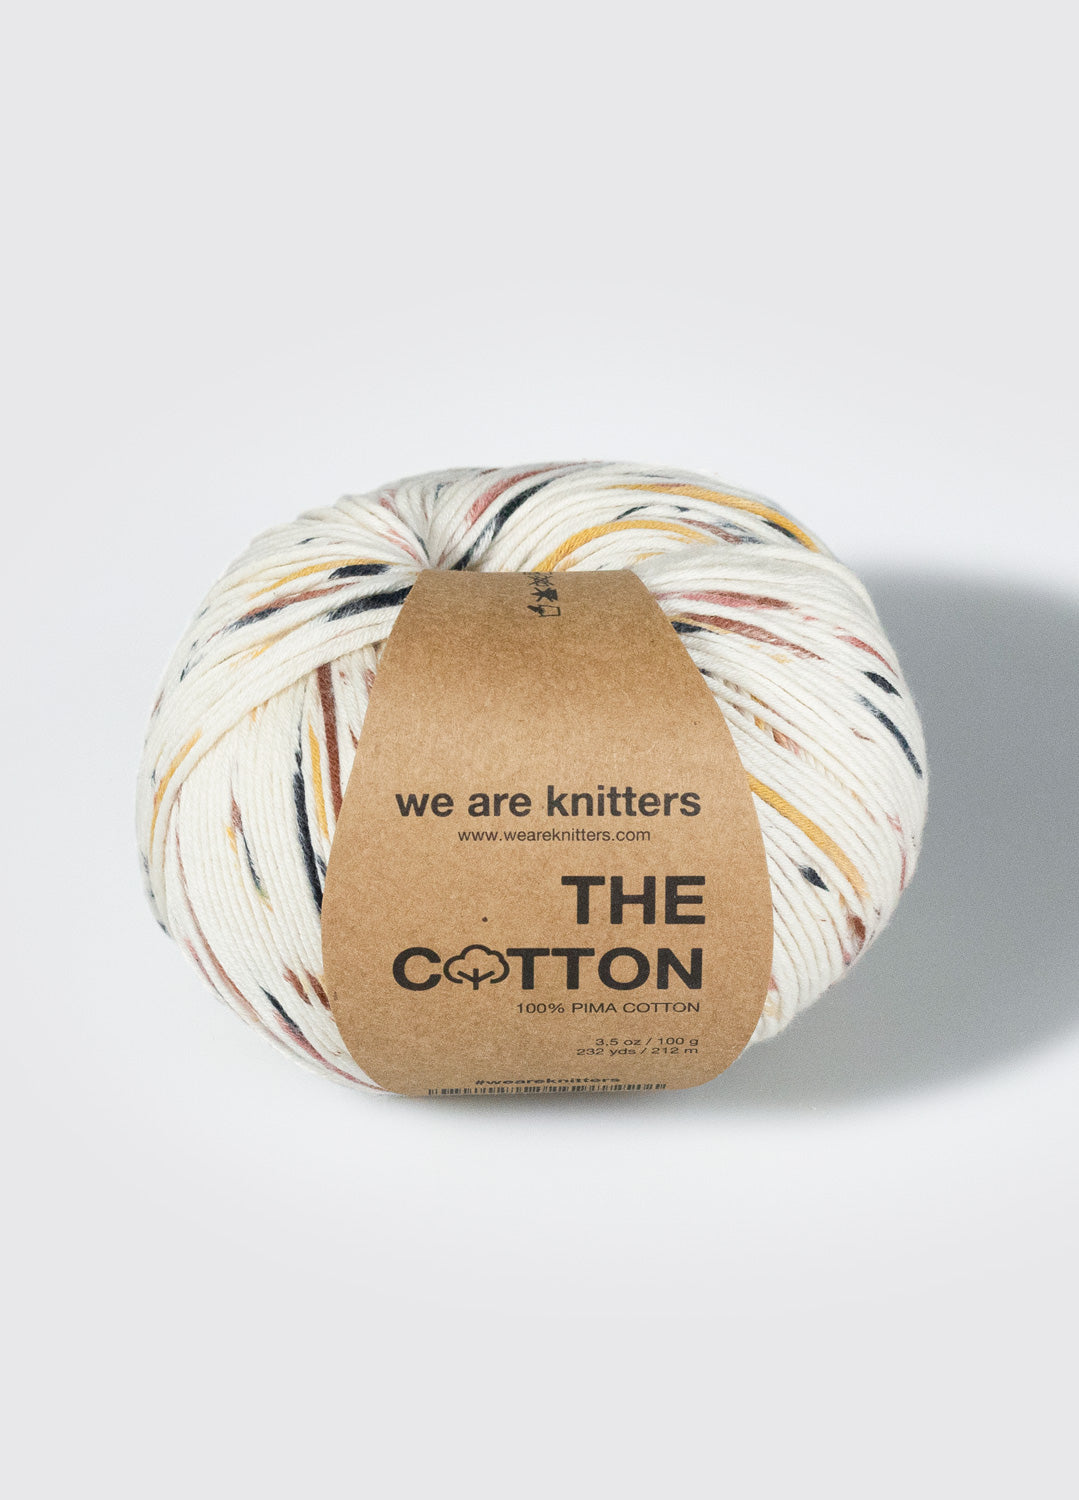 We Baumwolle are – knitters